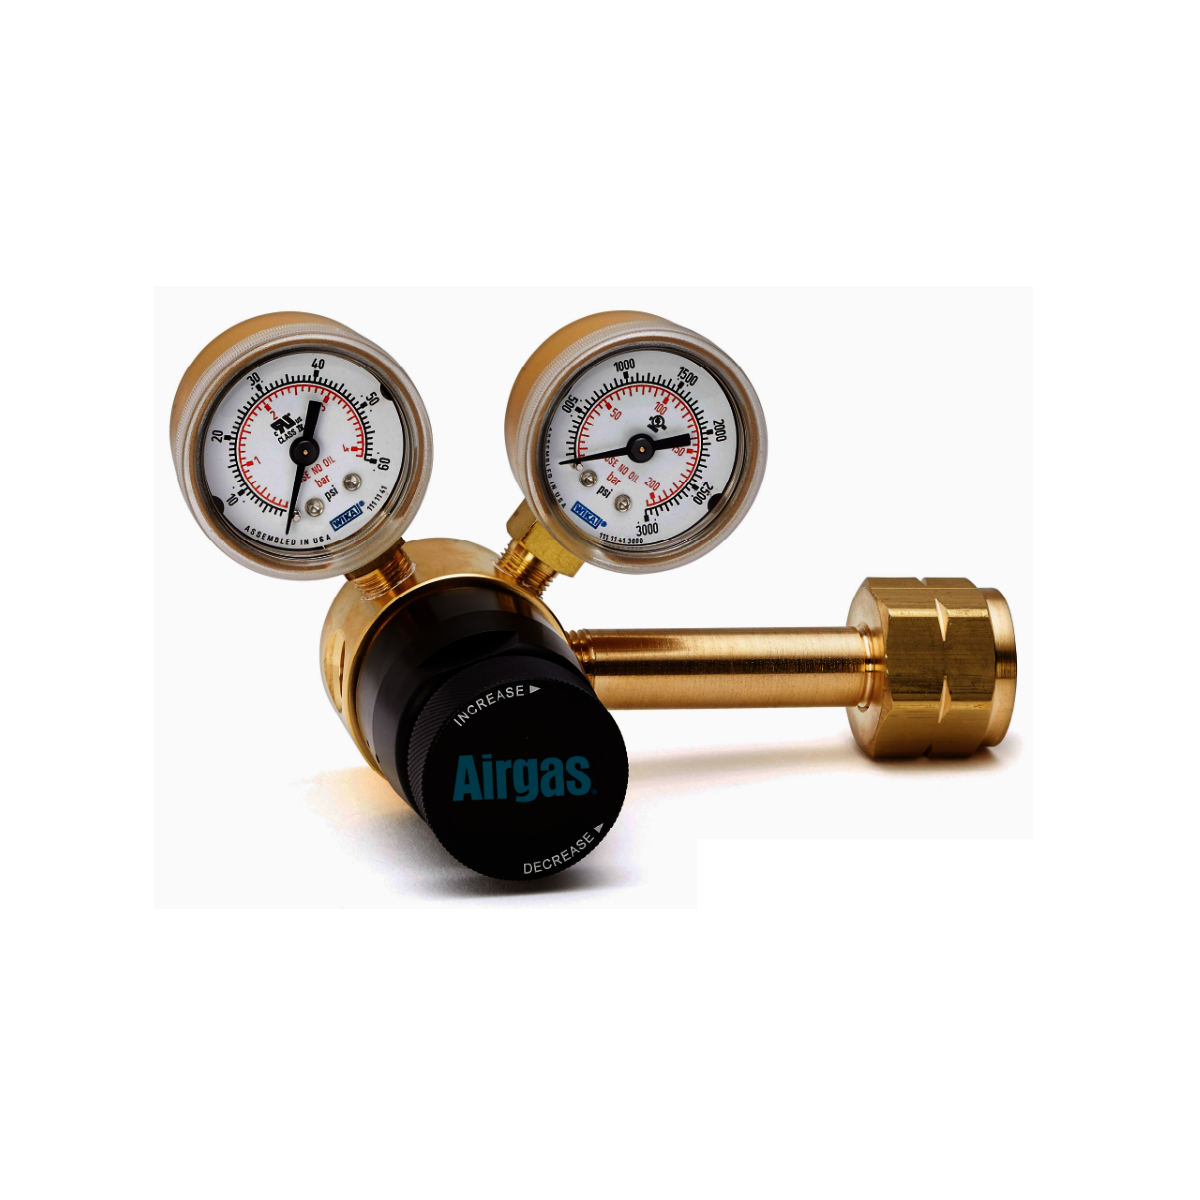 Airgas Model 206BS330 Stainless Steel High Purity Single Stage Regulator With CGA-330 Connection